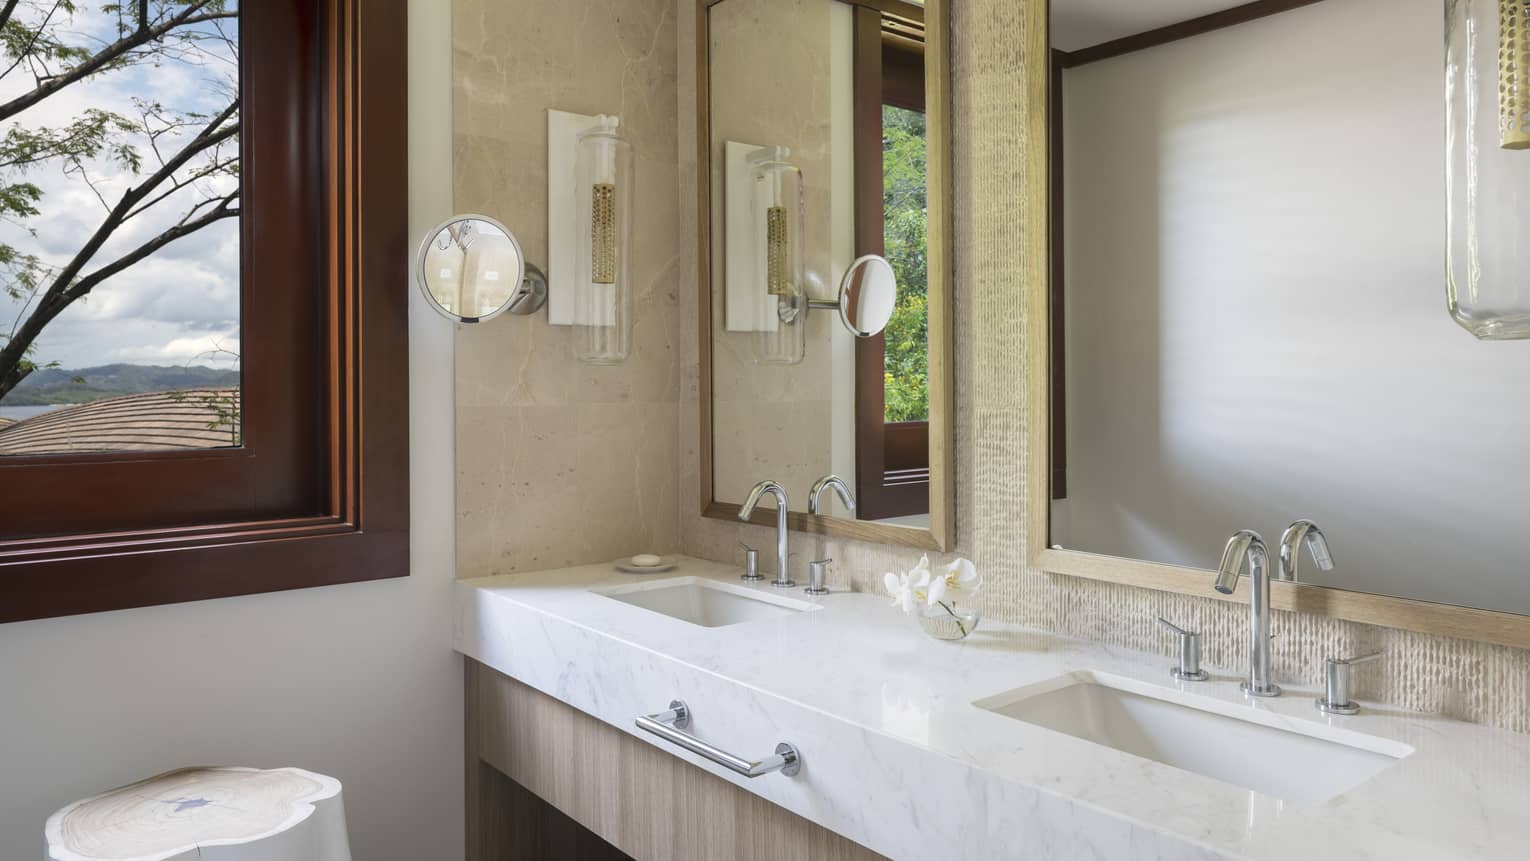 Bathroom View of Sinks and Mirrors with Window 